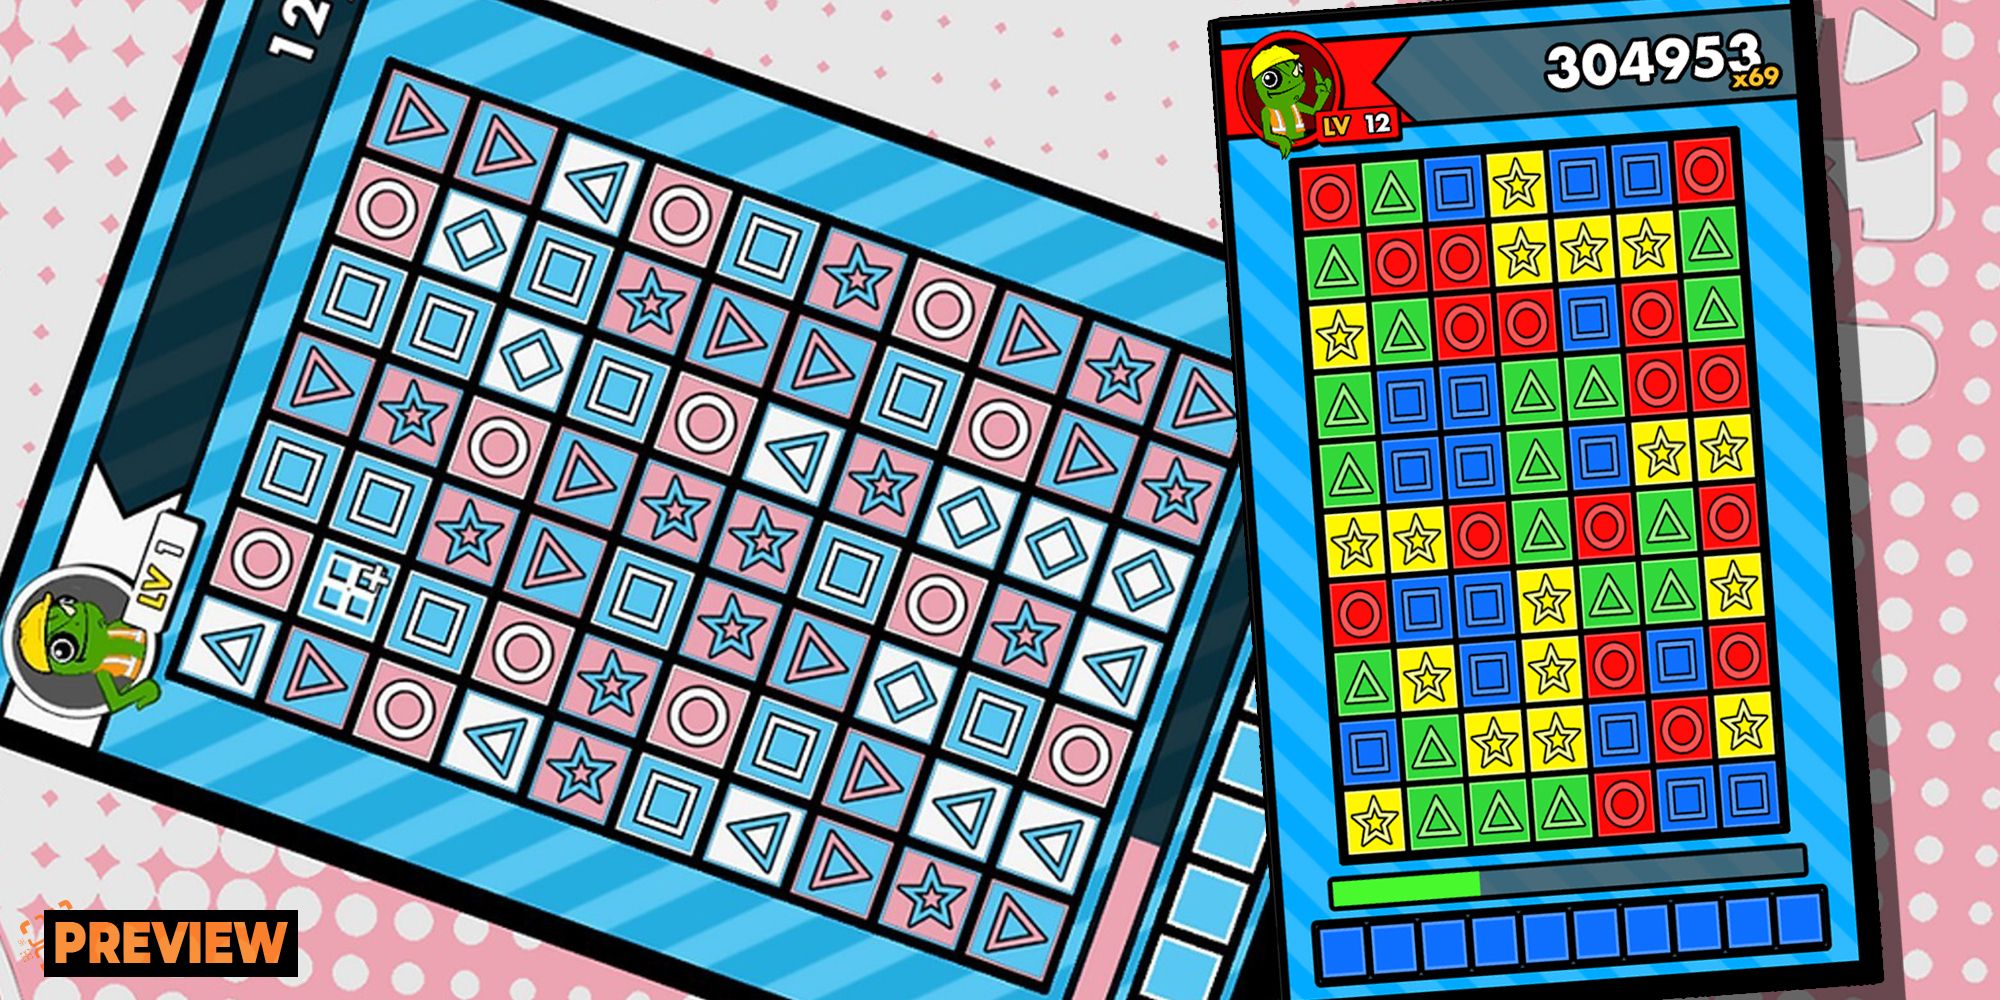 Collapsus Preview image with trans rights palette and vertical game board